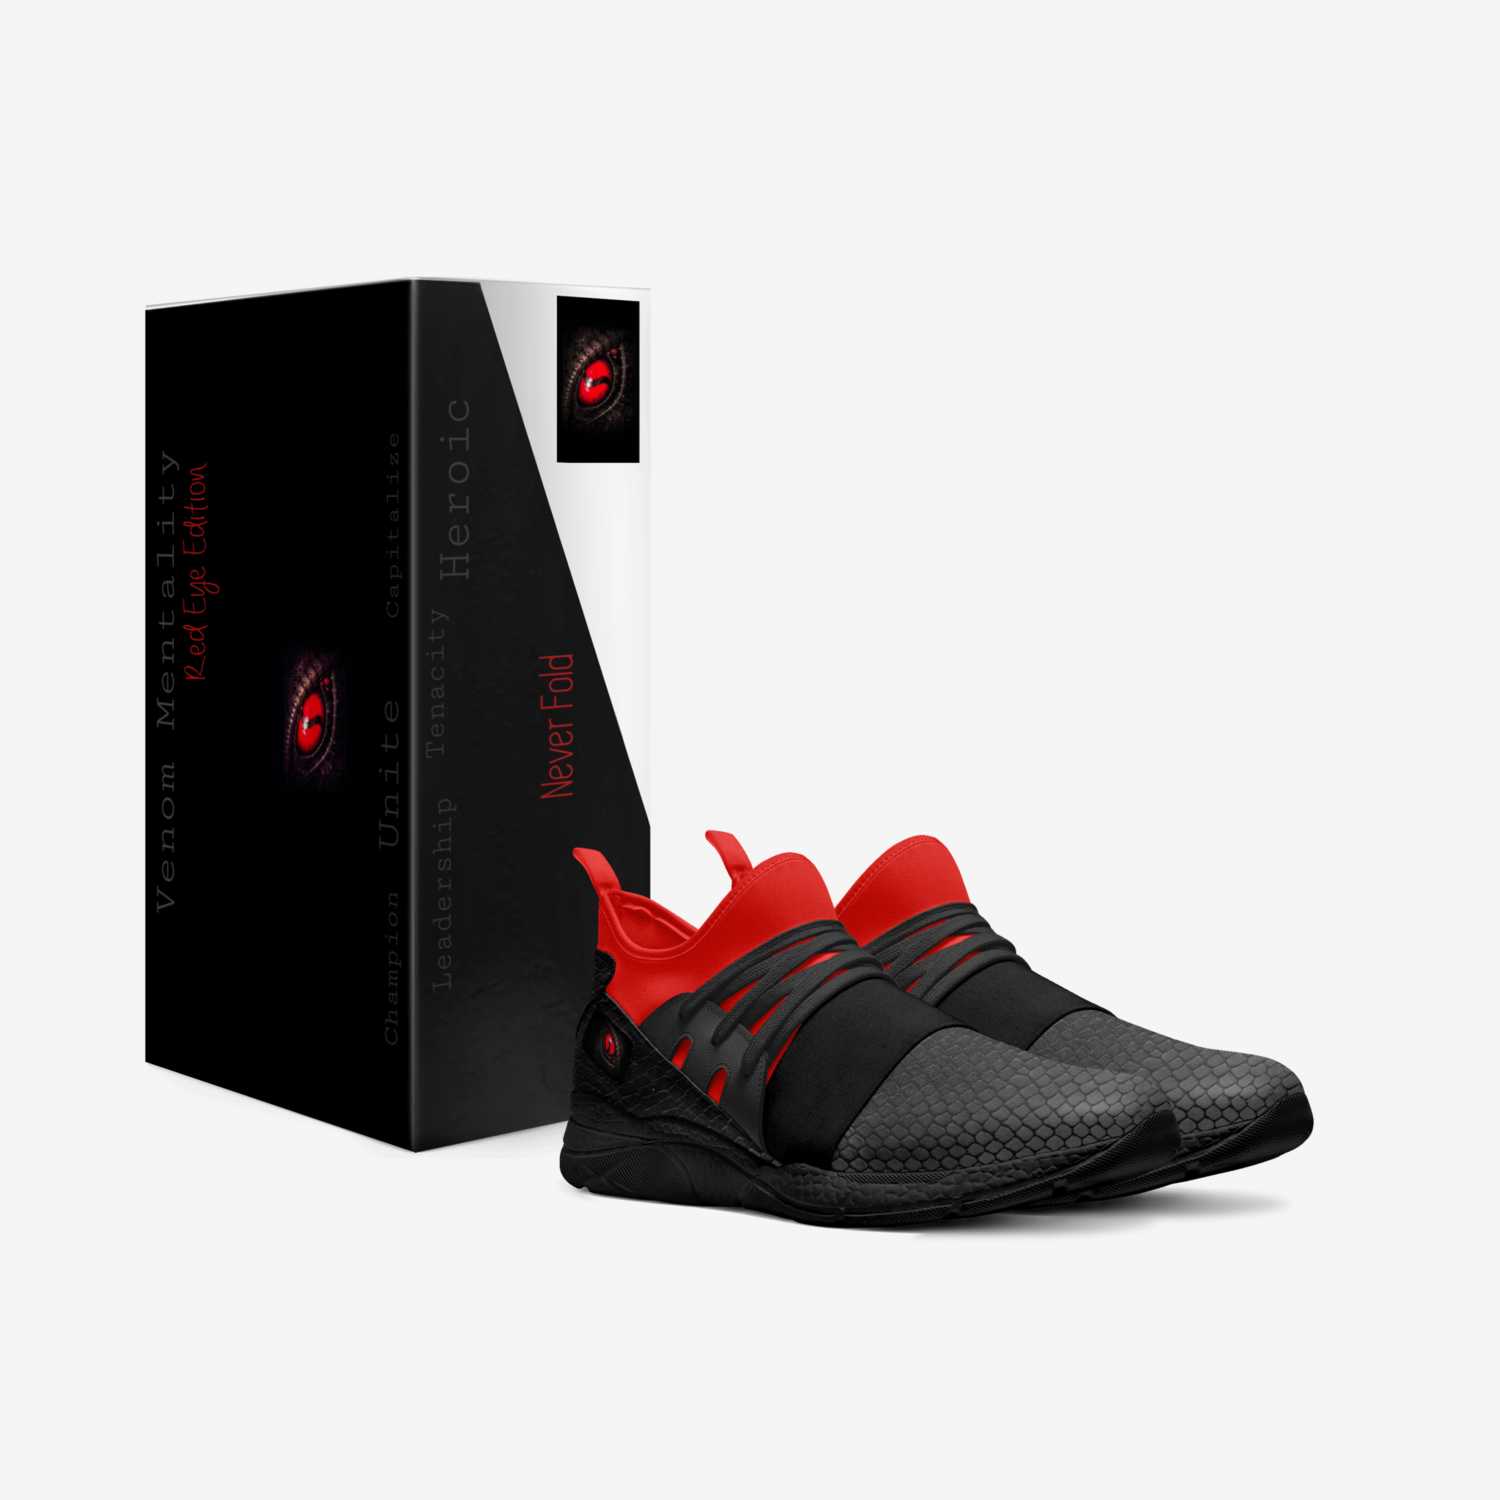 VM Red Eye custom made in Italy shoes by The Profit Team | Box view